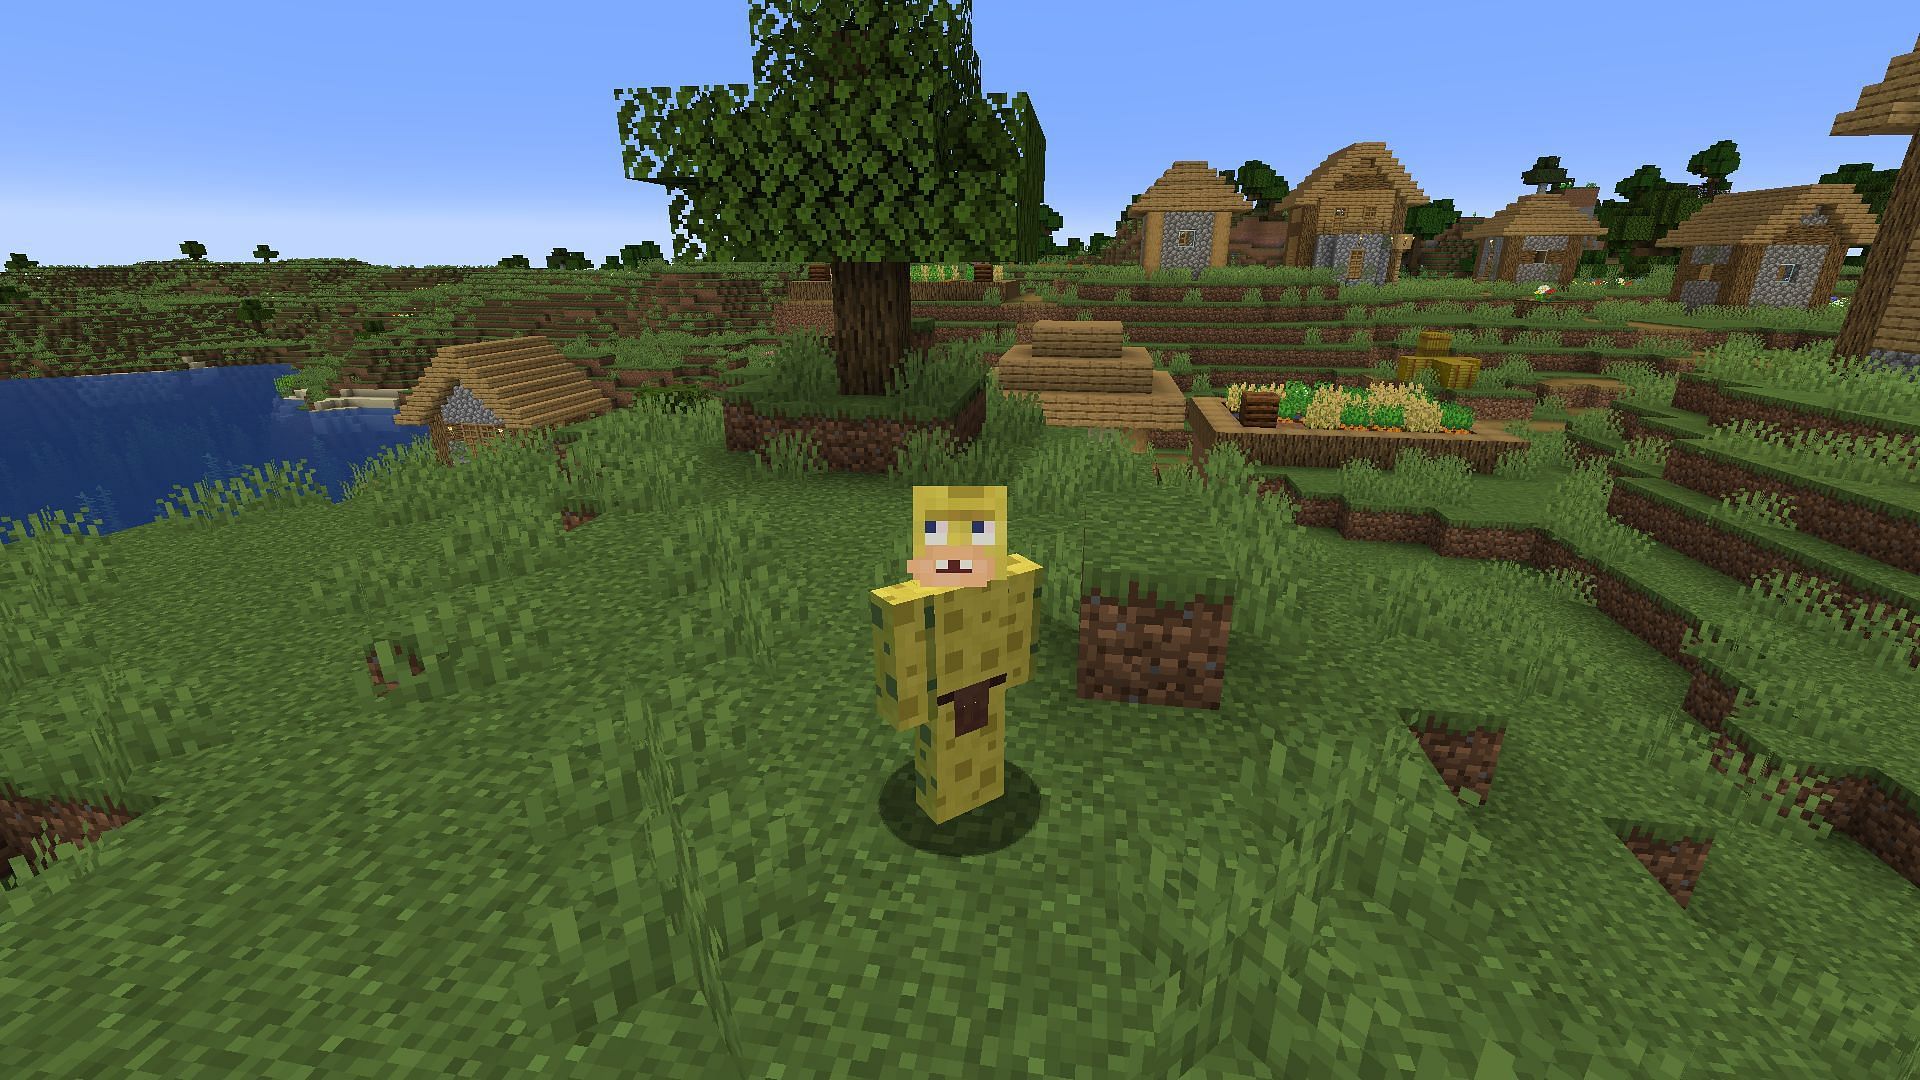 Spongebob&#039;s prehistoric counterpart is as confused as ever in this skin (Image via Mojang)